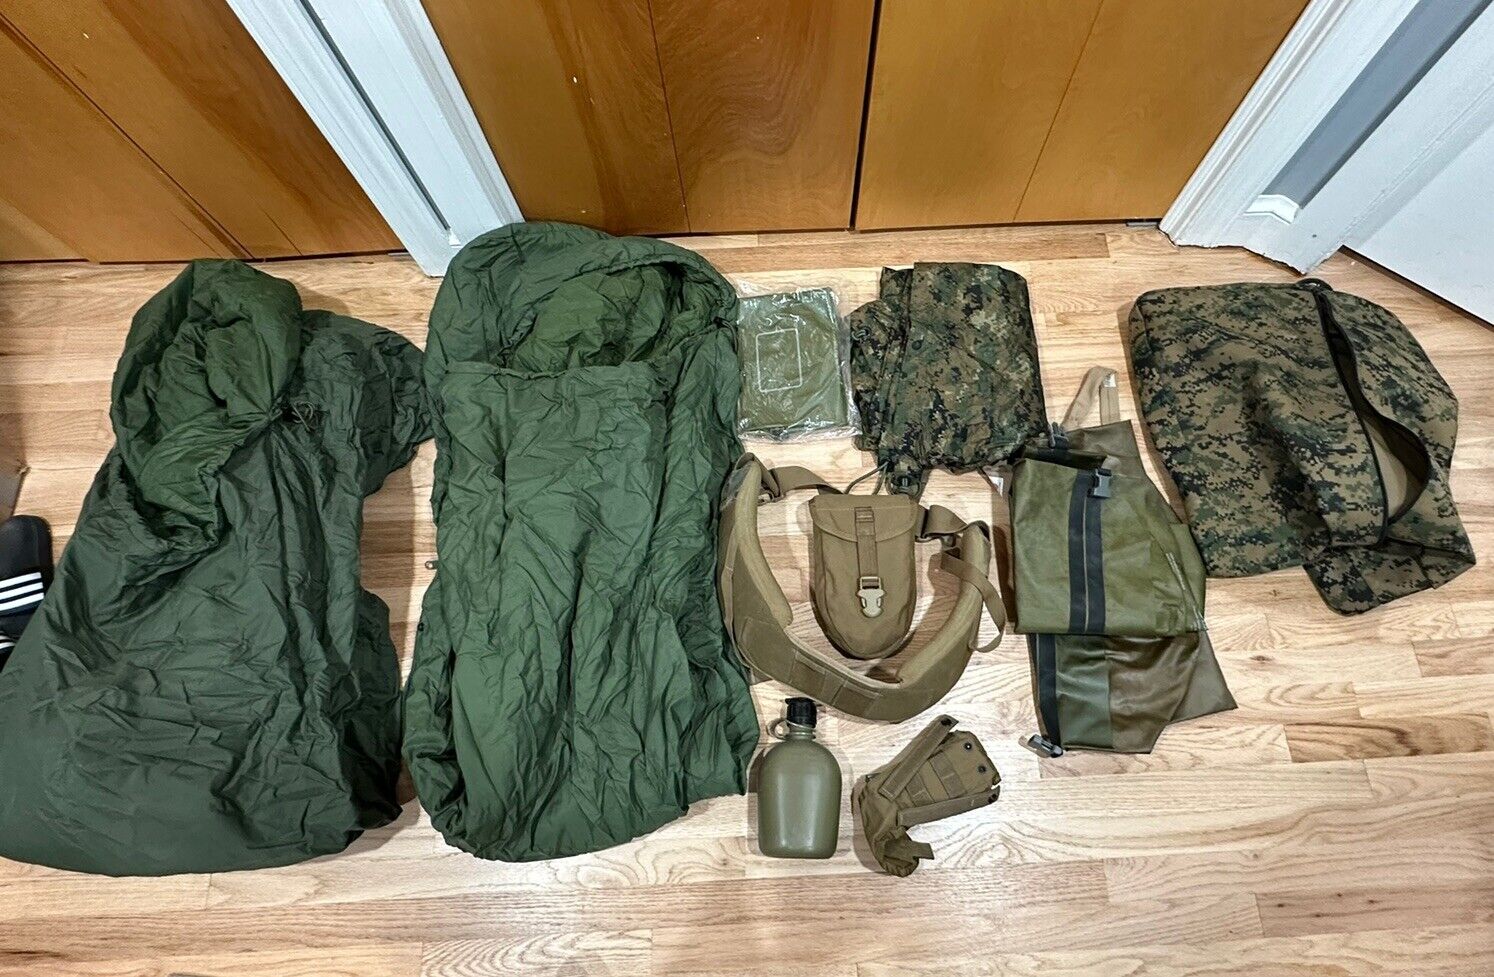 lot of original military equipment from the US Army sleeping bags,